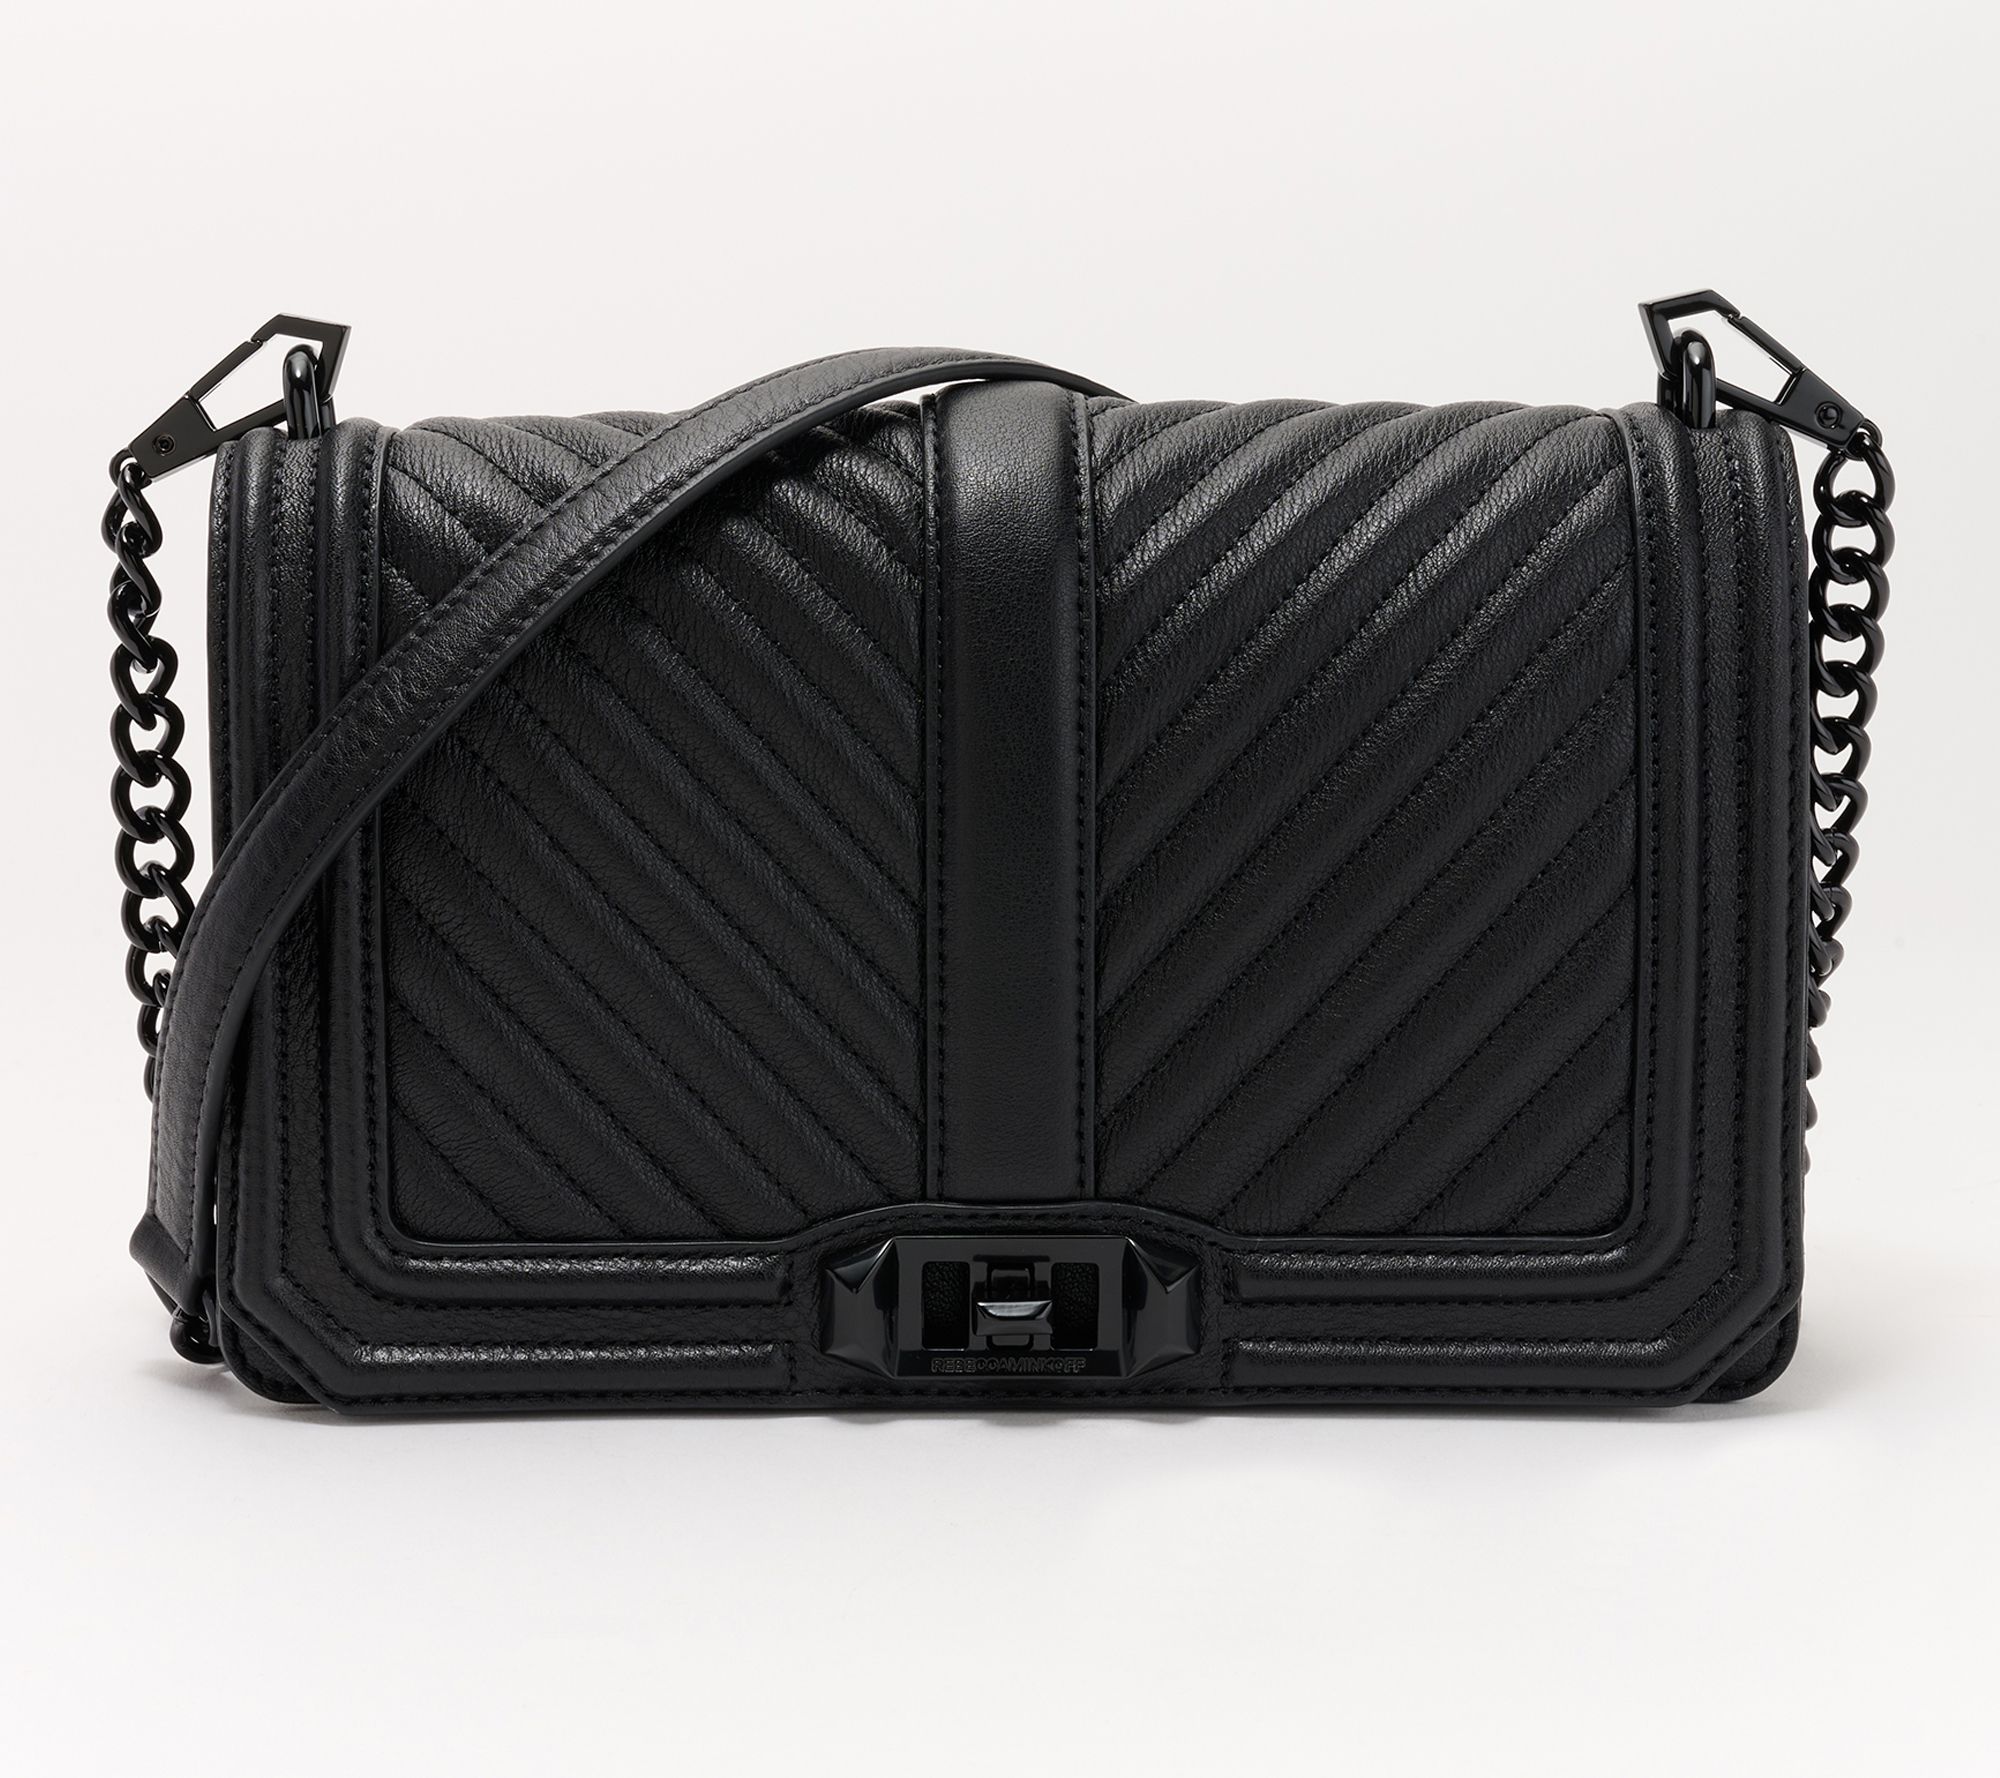 Shop Rebecca Minkoff Julian Chevron-Quilted Leather Backpack